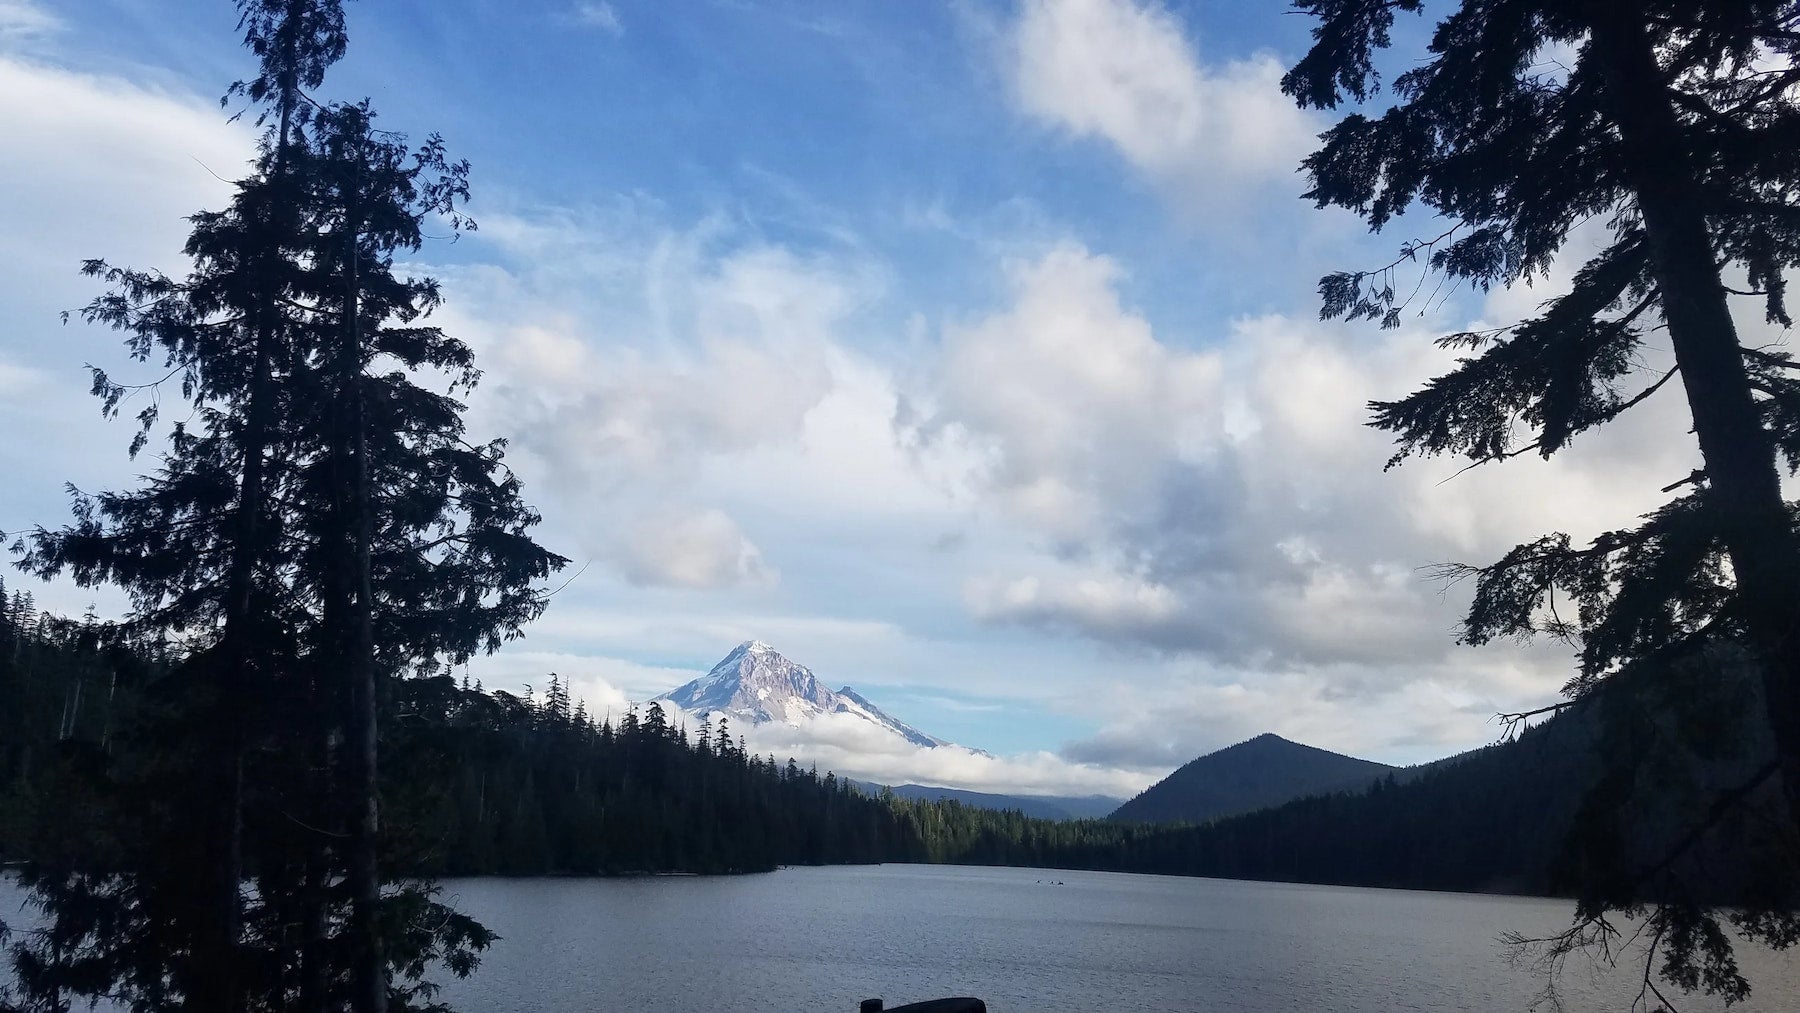 View overlooking lake through a forested campsite with snow dusted Mt. Hood in the distance.